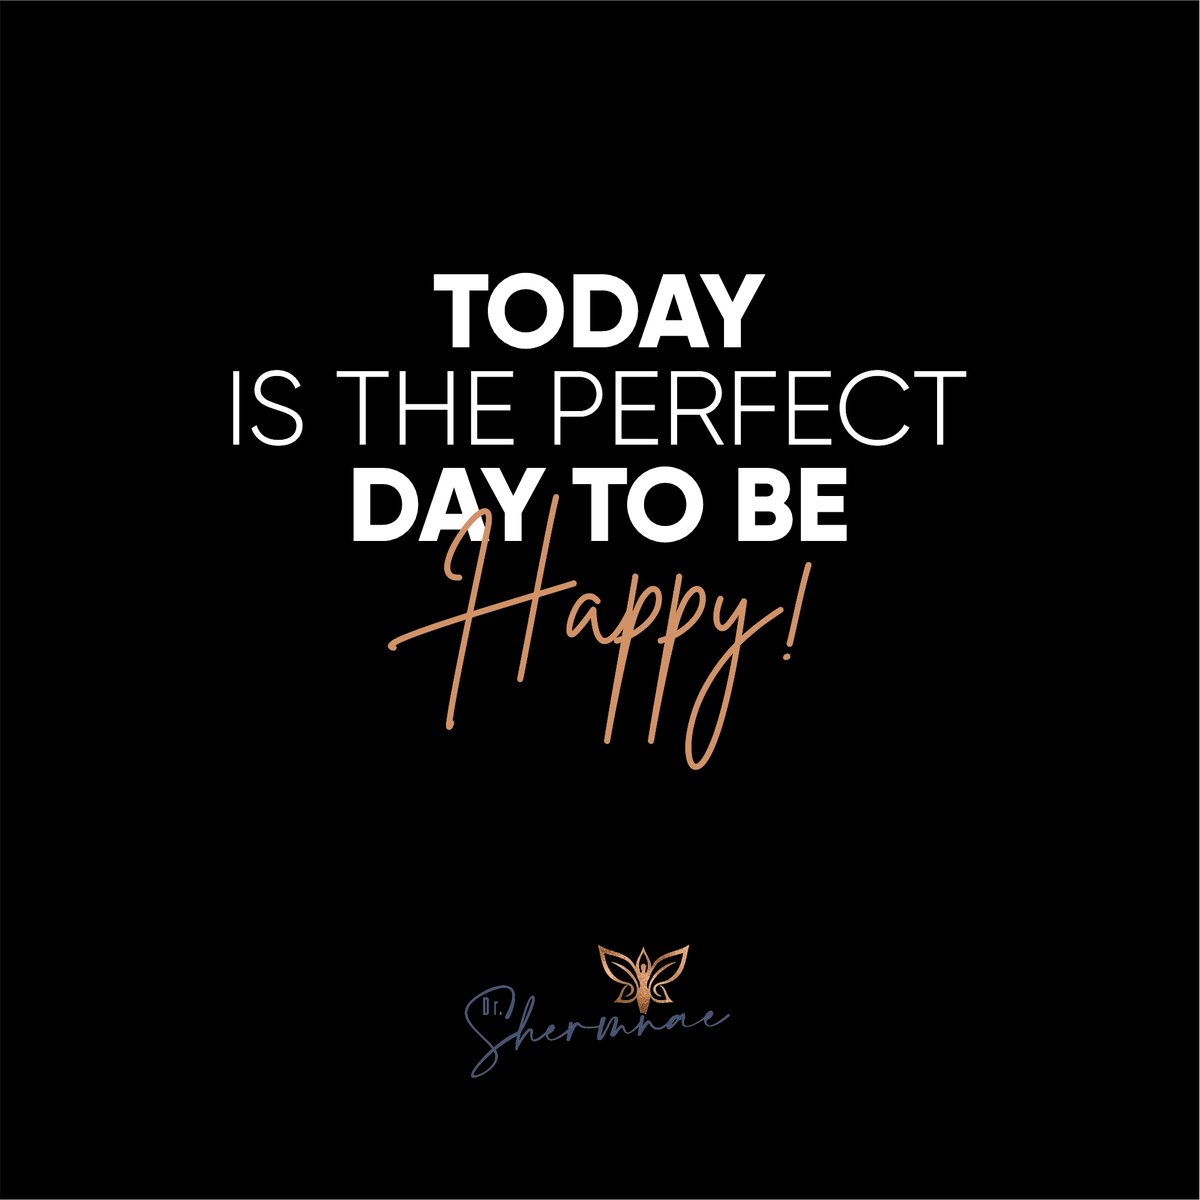 Happy Monday!!! Today is the perfect day to be happy!

#drshermnae #personalcoach #success #business #inspiration #selflove #alignment #transformation #meditation #empaths #selfempowerment #vulnerability #intuition #higherself #intuitive #consciousness #abundance #confidence